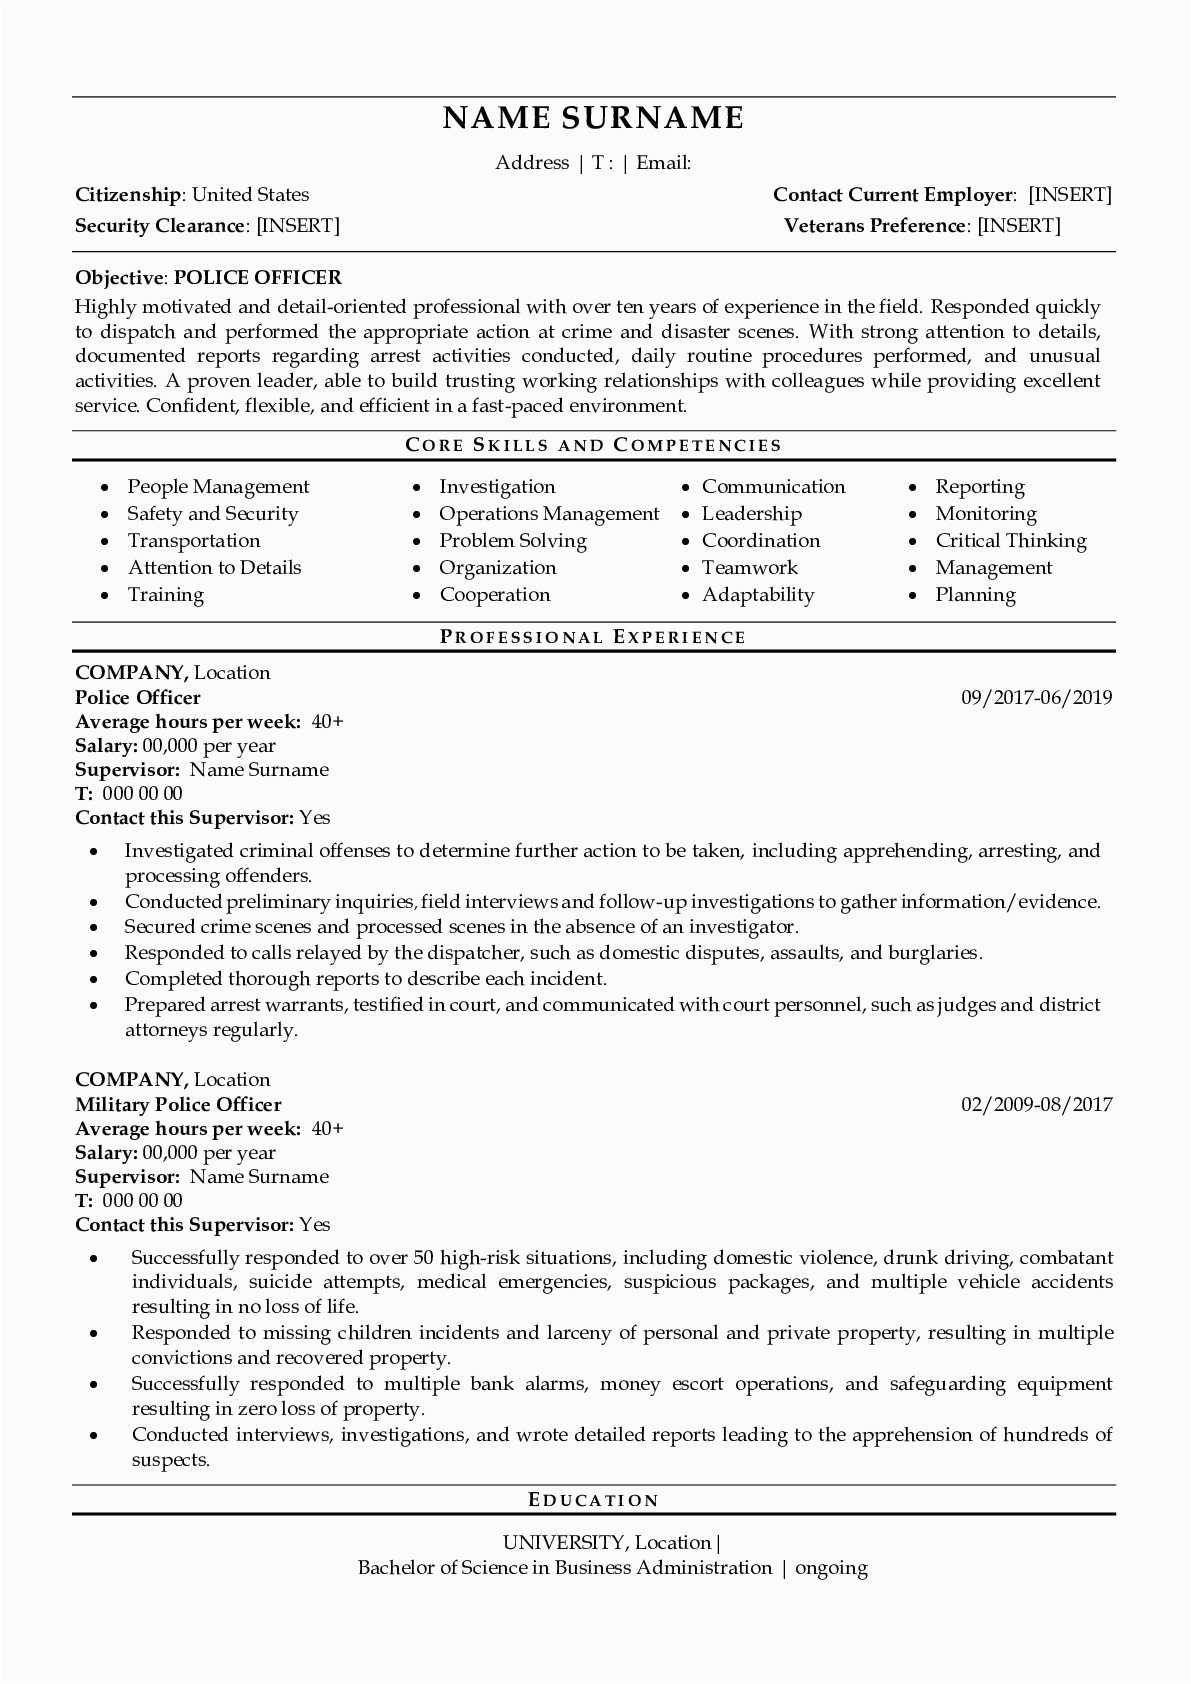 Sample Resume to Become A Police Officer Police Ficer Resume Examples Resumegets